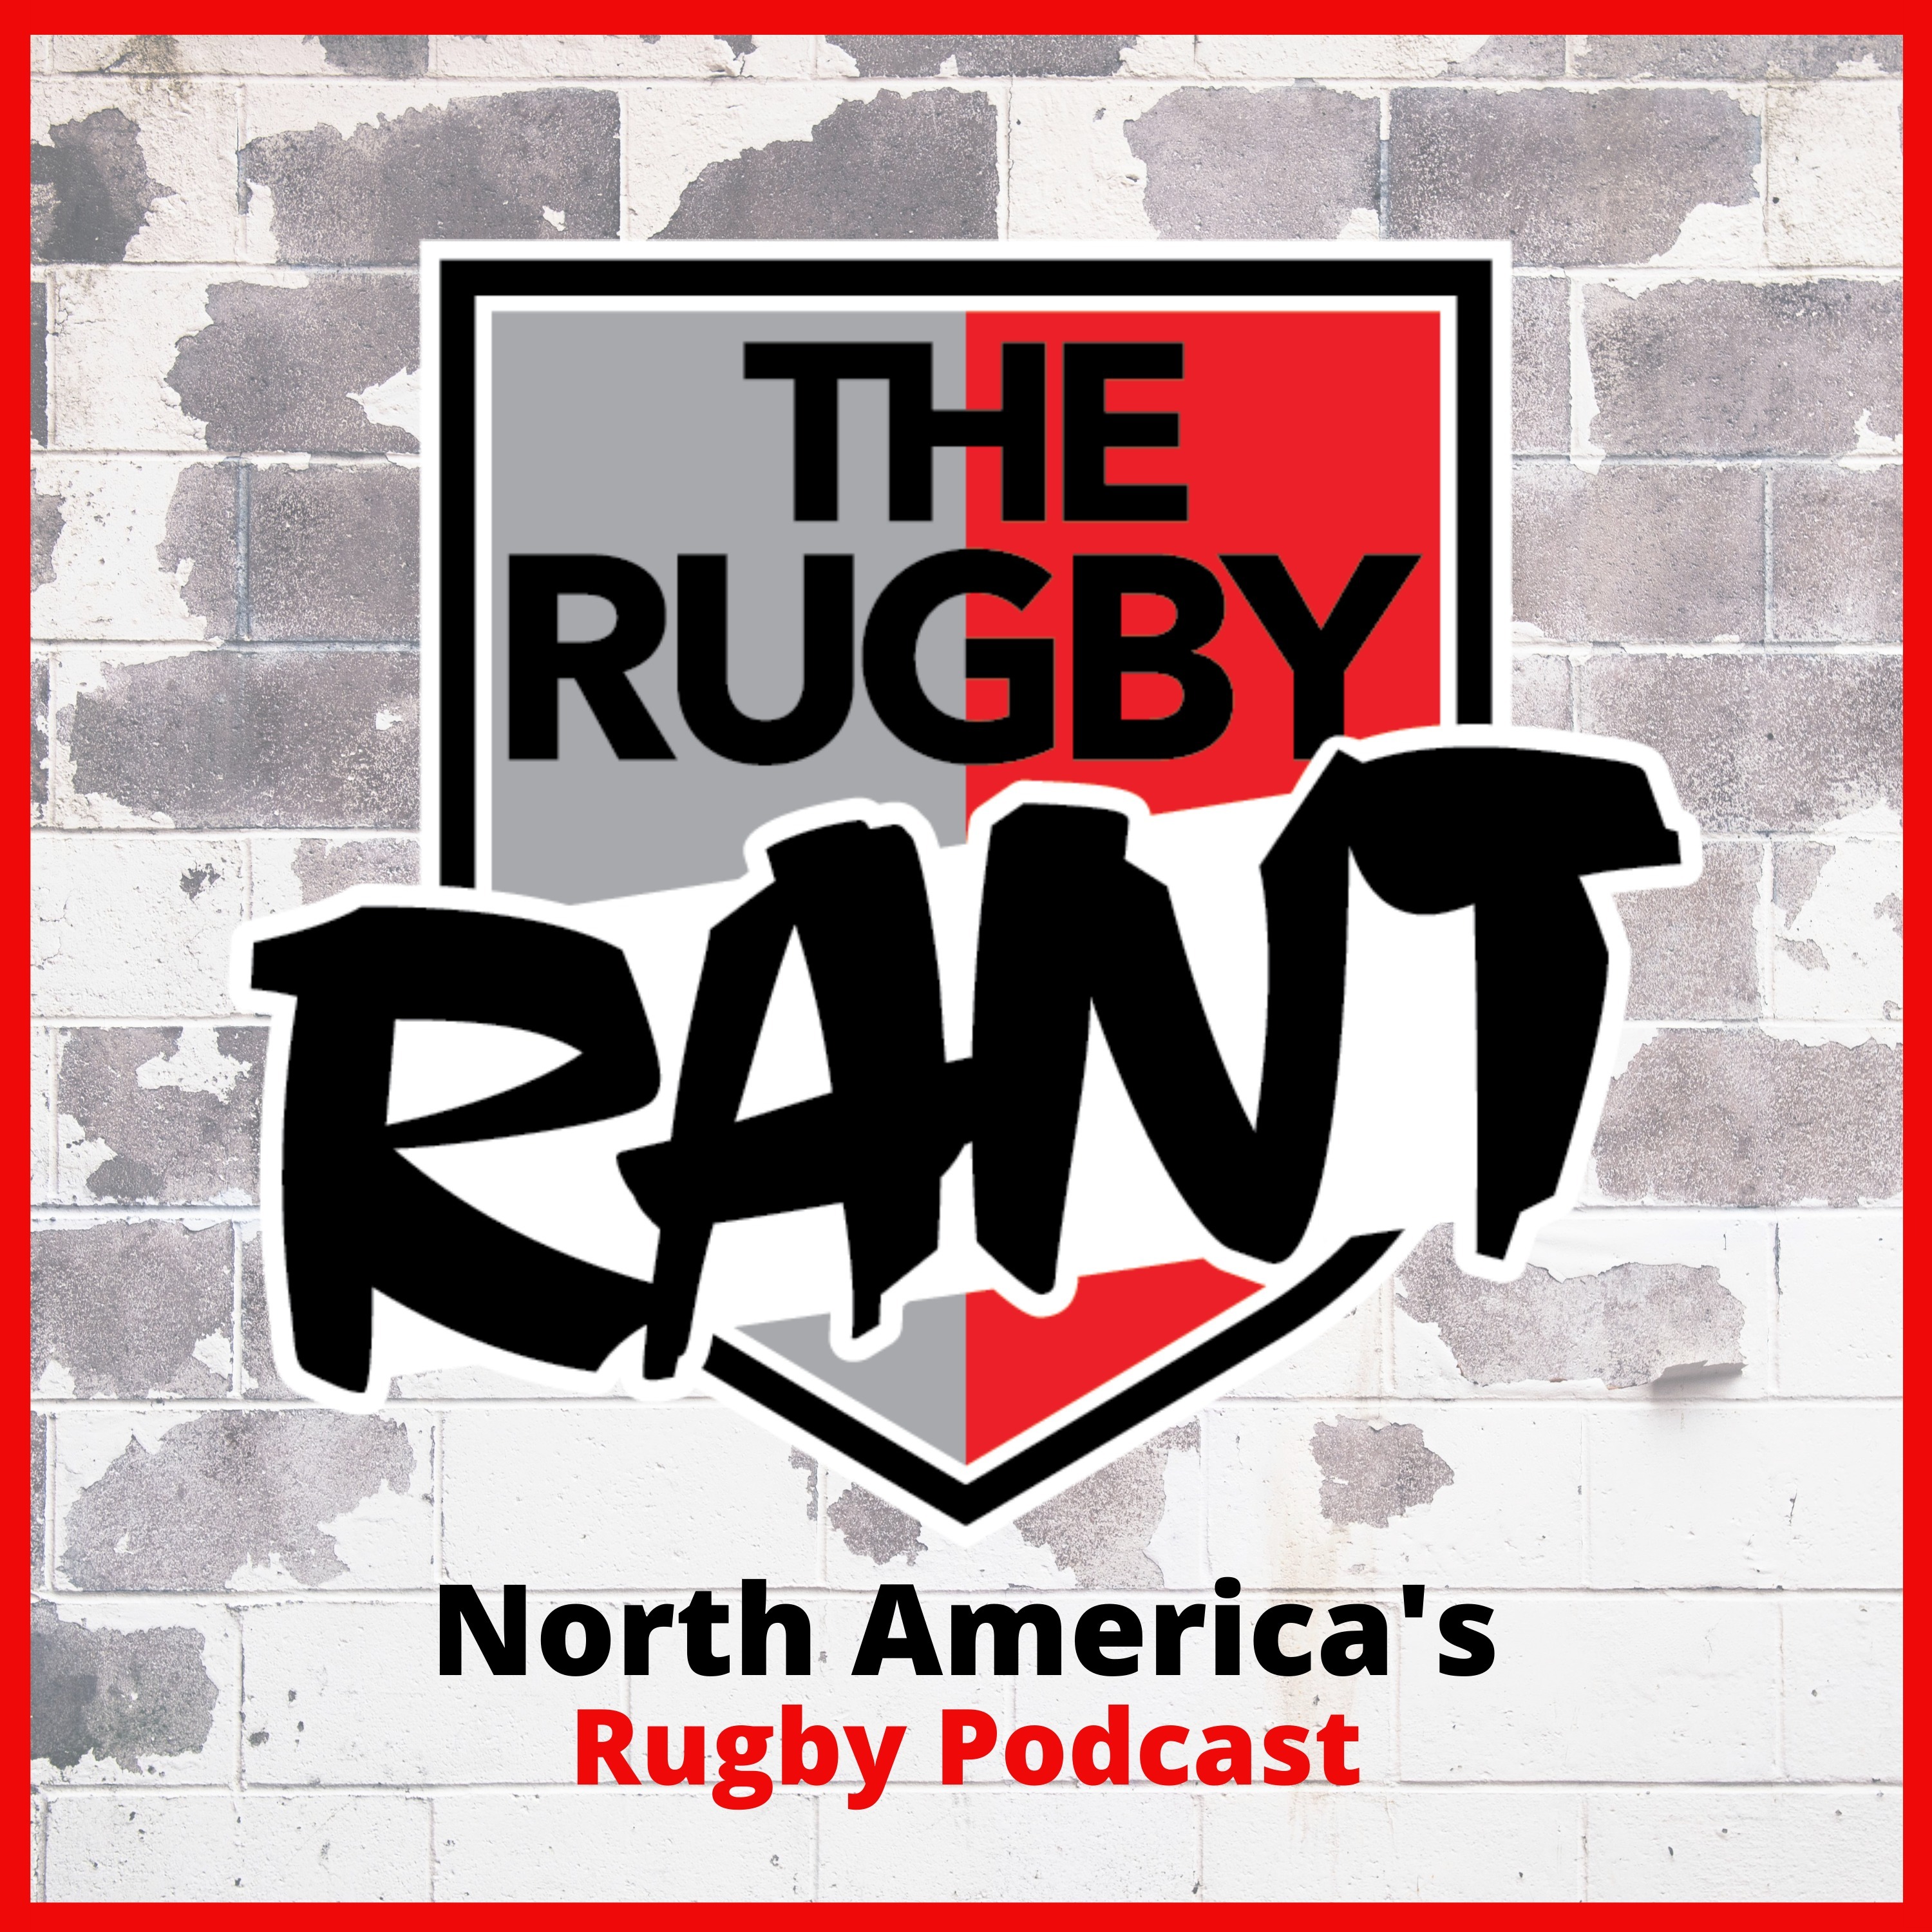 The Rugby Rant - Episode 32